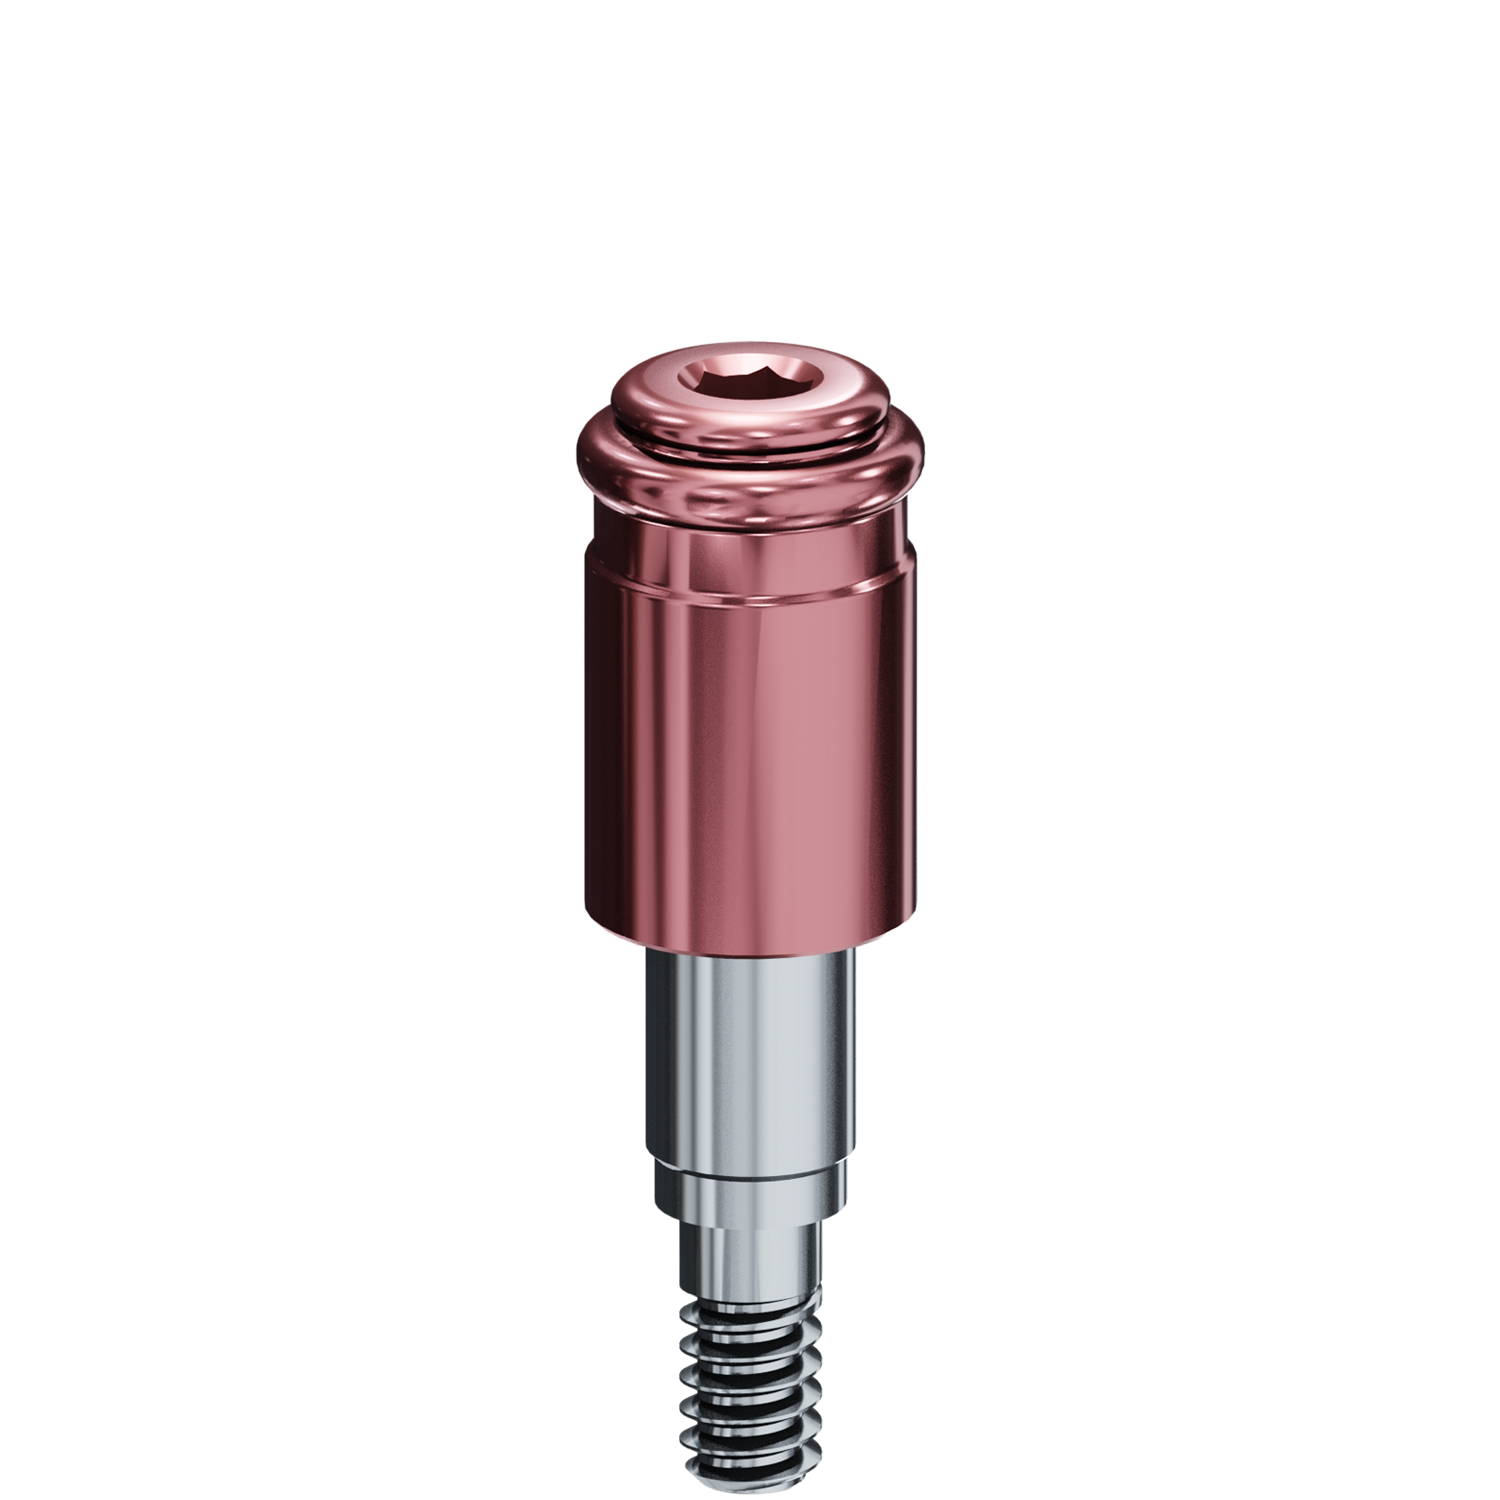 R-Tx Attachment System - 3.4mm Biomet 3i® Certain Connection - 048" Drive - 2.0mm